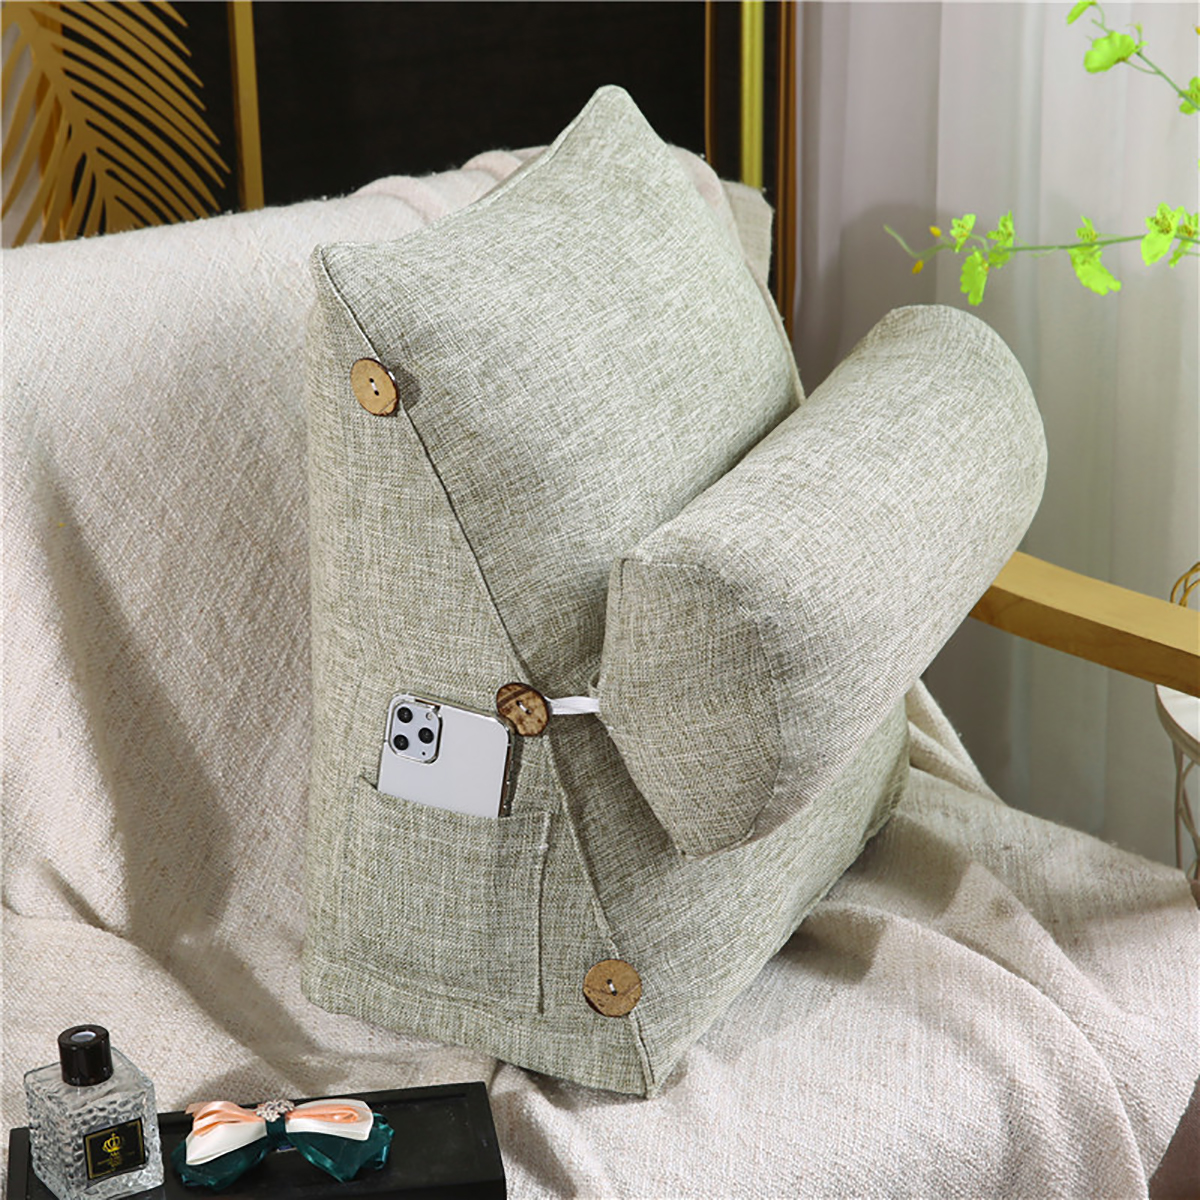 Adjustable Back Wedge Cushion Pillow Triangle Backrest Cushion Lumbar Cushion Rest Plush Cushion Reading Pillow for Sofa Bed Office Chair